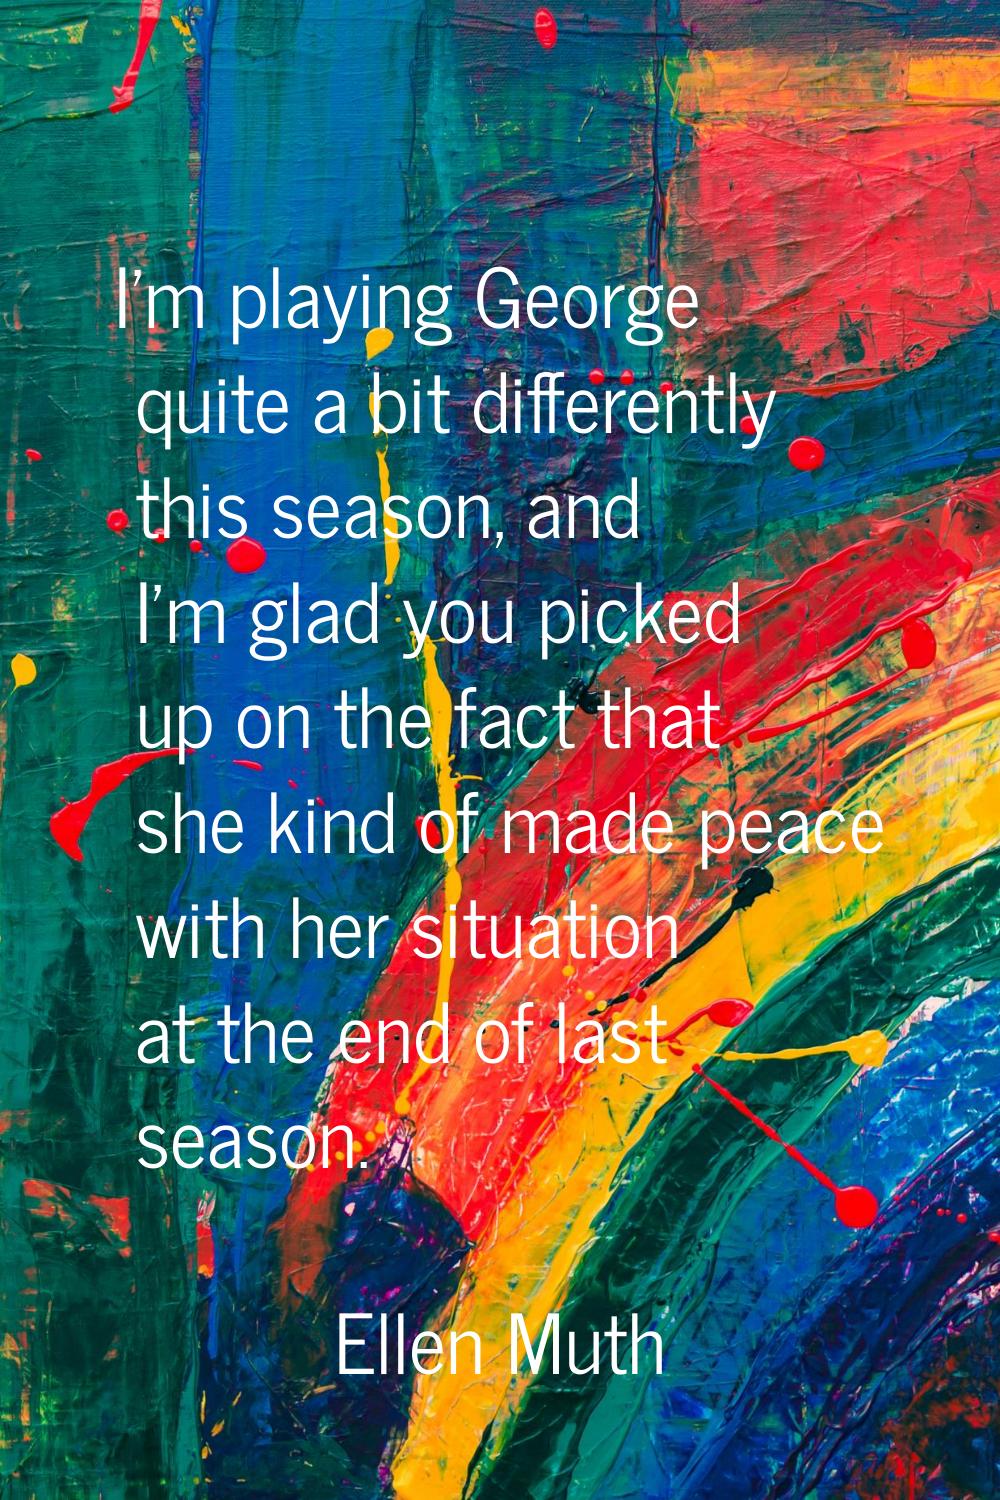 I'm playing George quite a bit differently this season, and I'm glad you picked up on the fact that